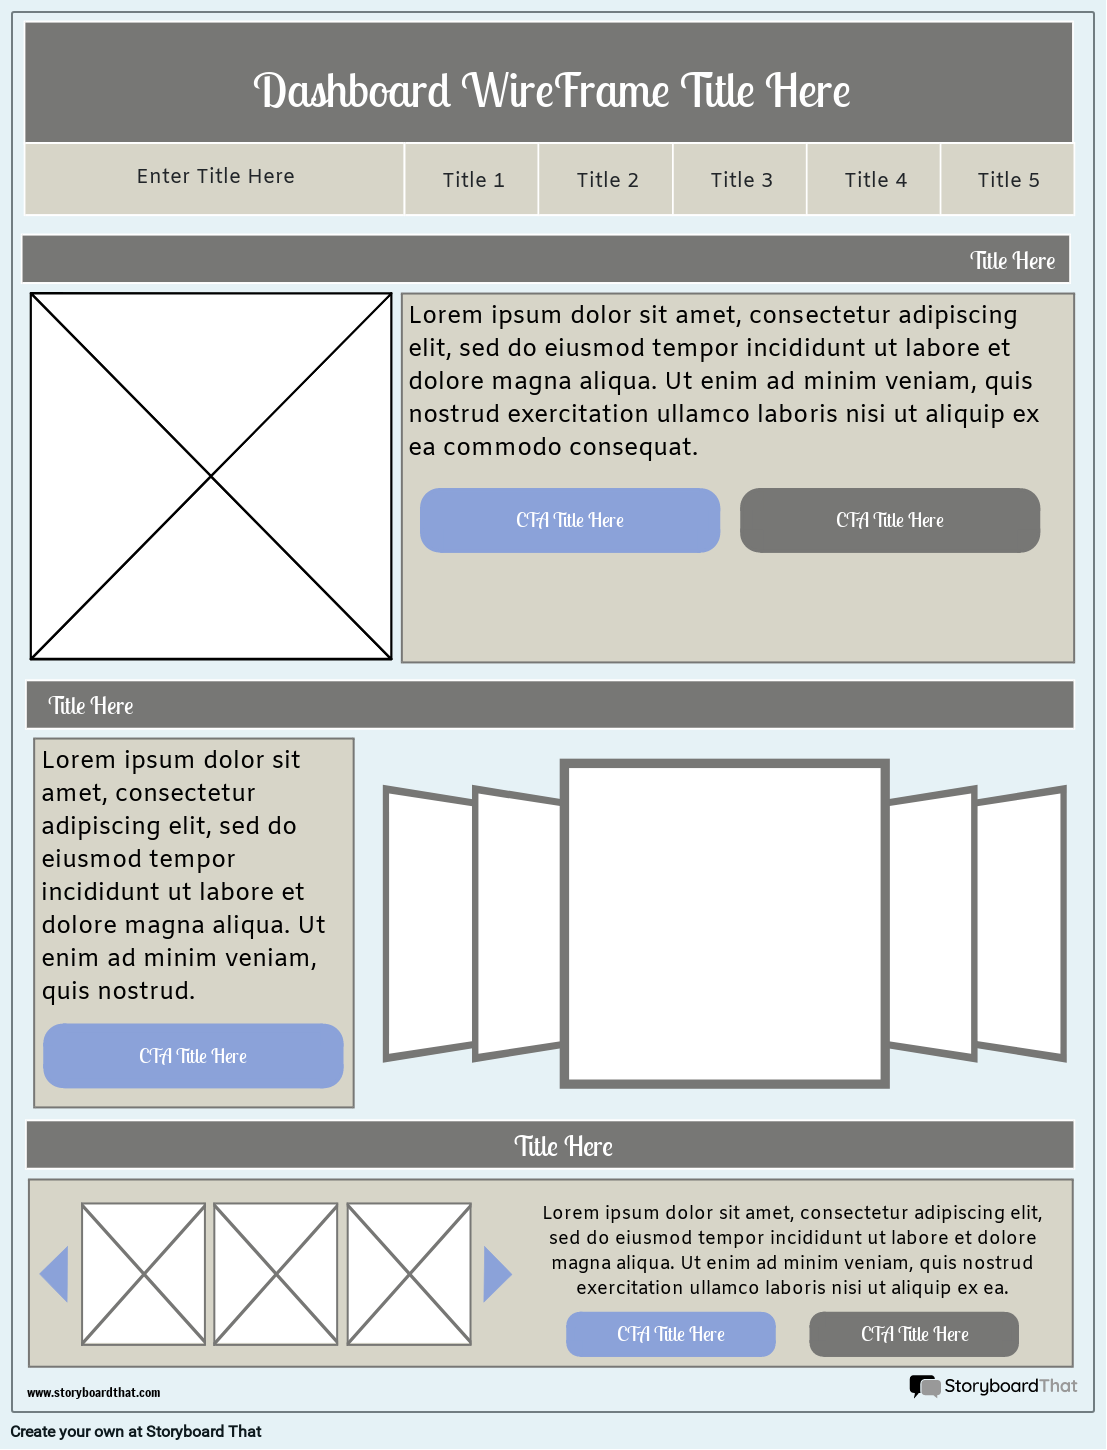 Corporate Dashboard Wireframe Template 4